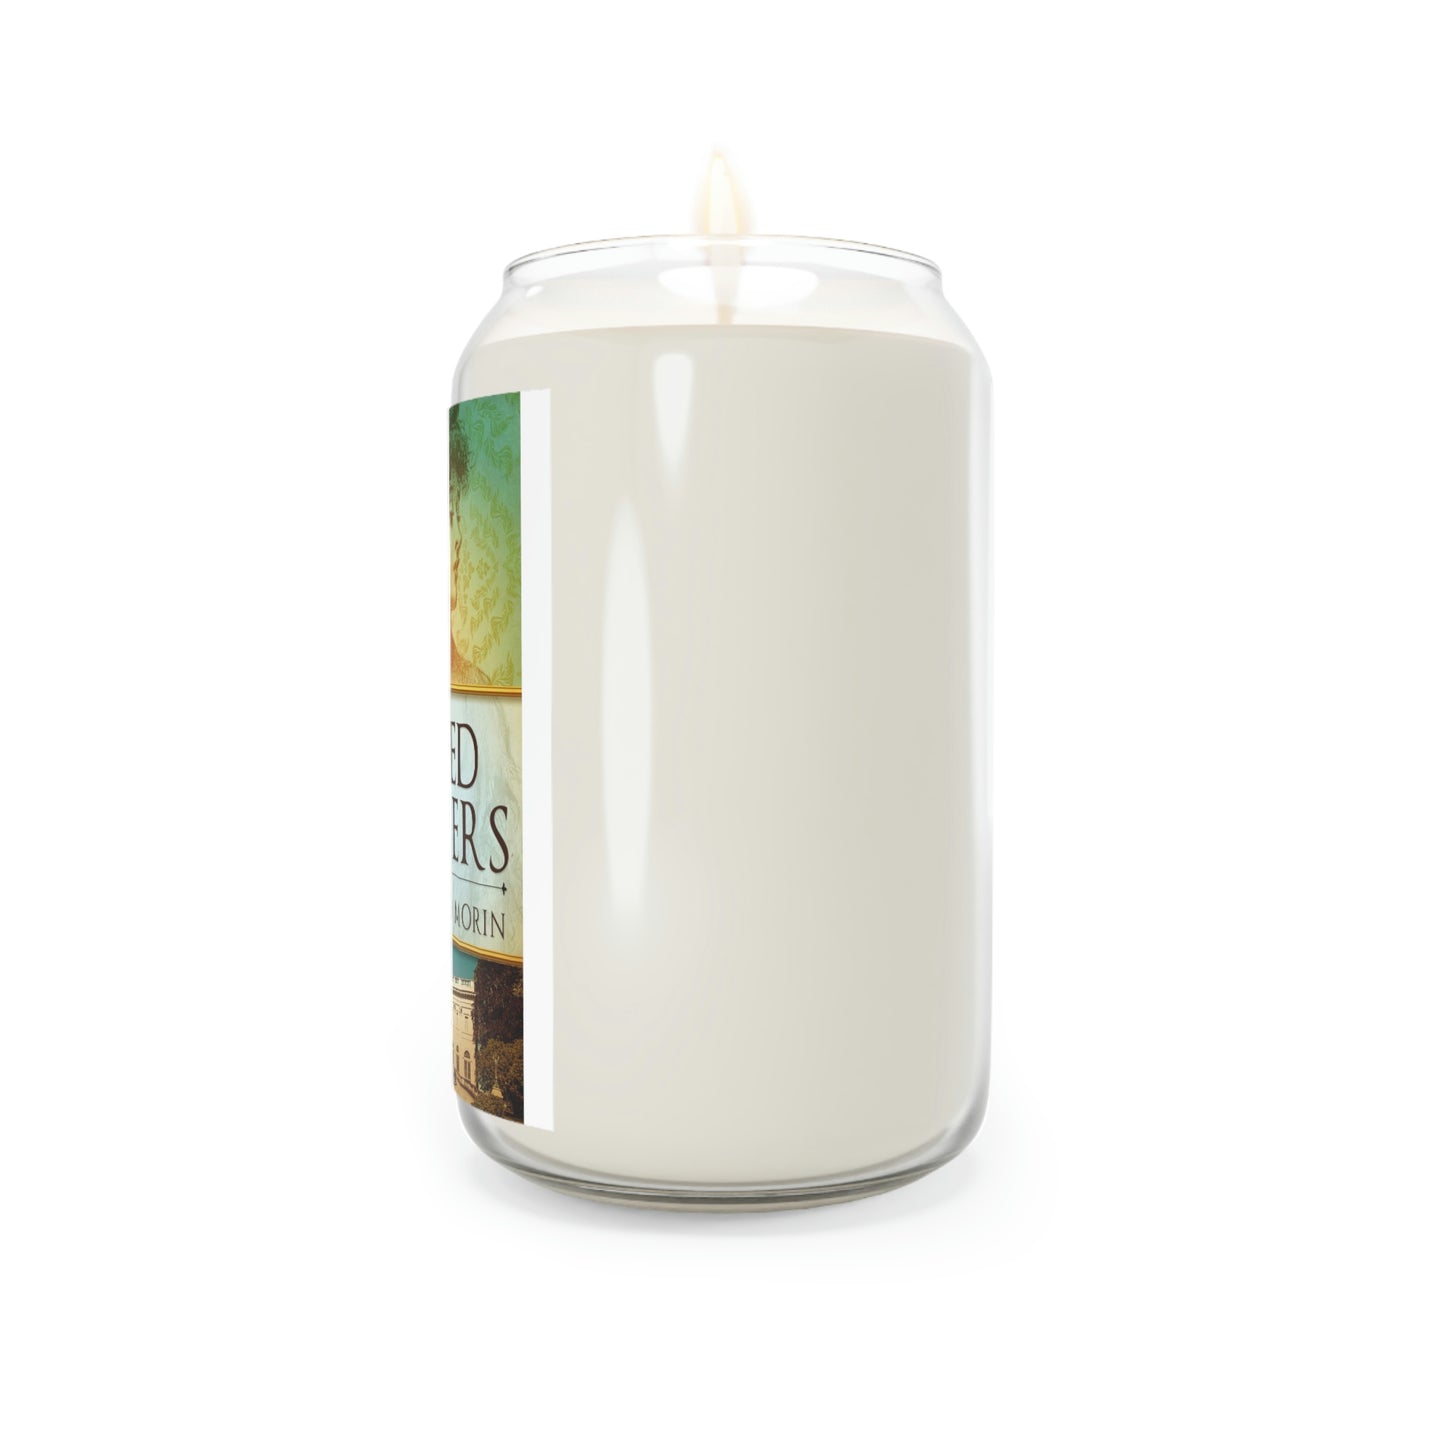 Gilded Summers - Scented Candle